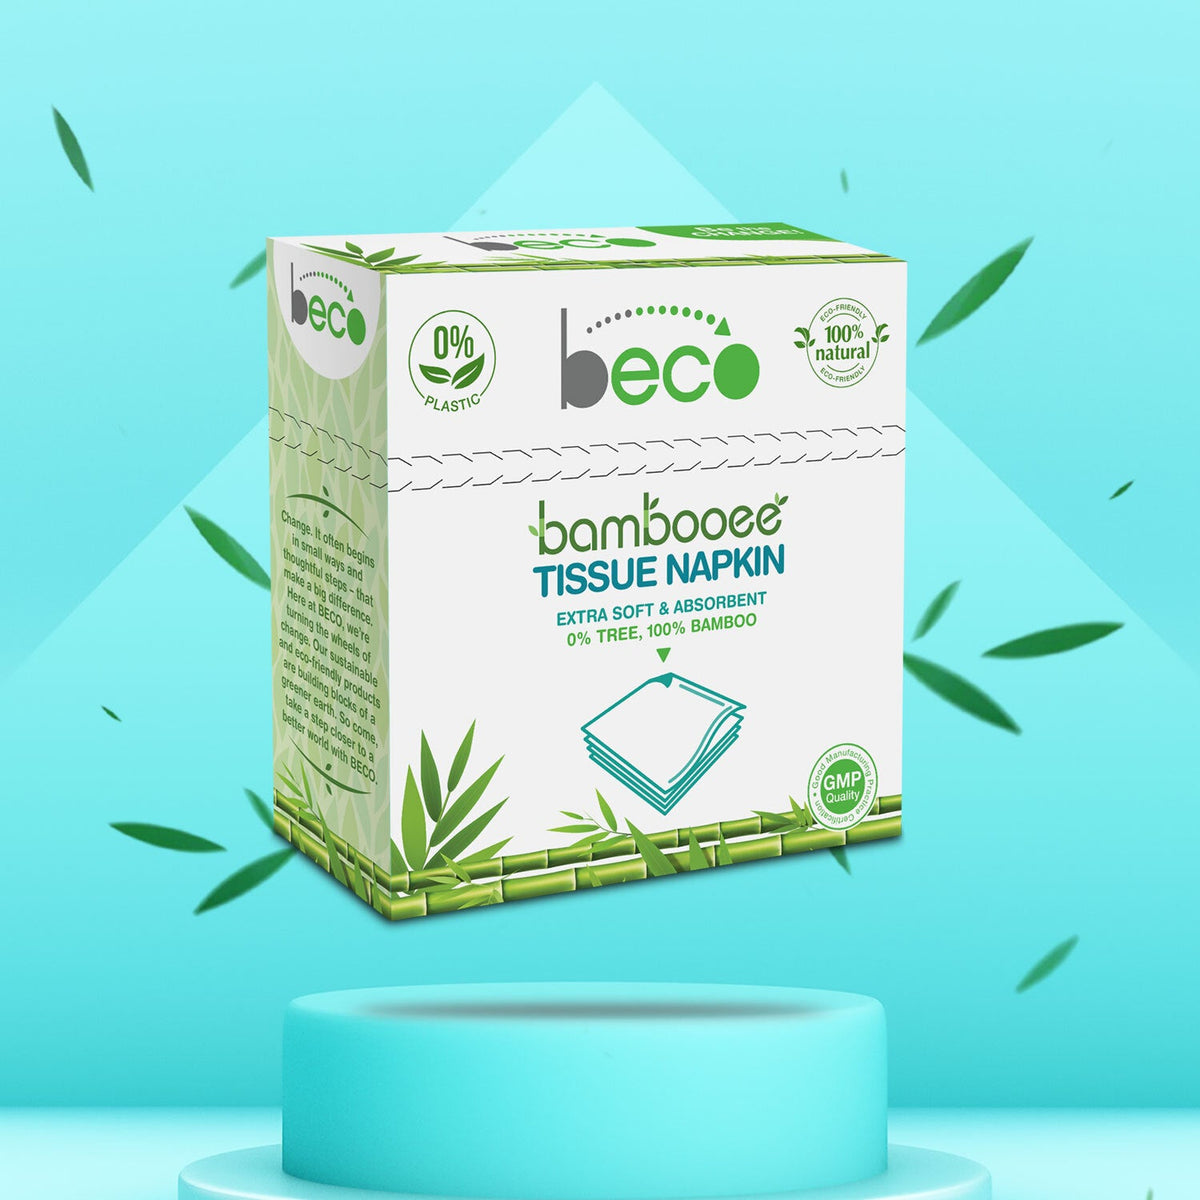 Bamboo Tissue Paper Napkin - 50 Pieces | Beco